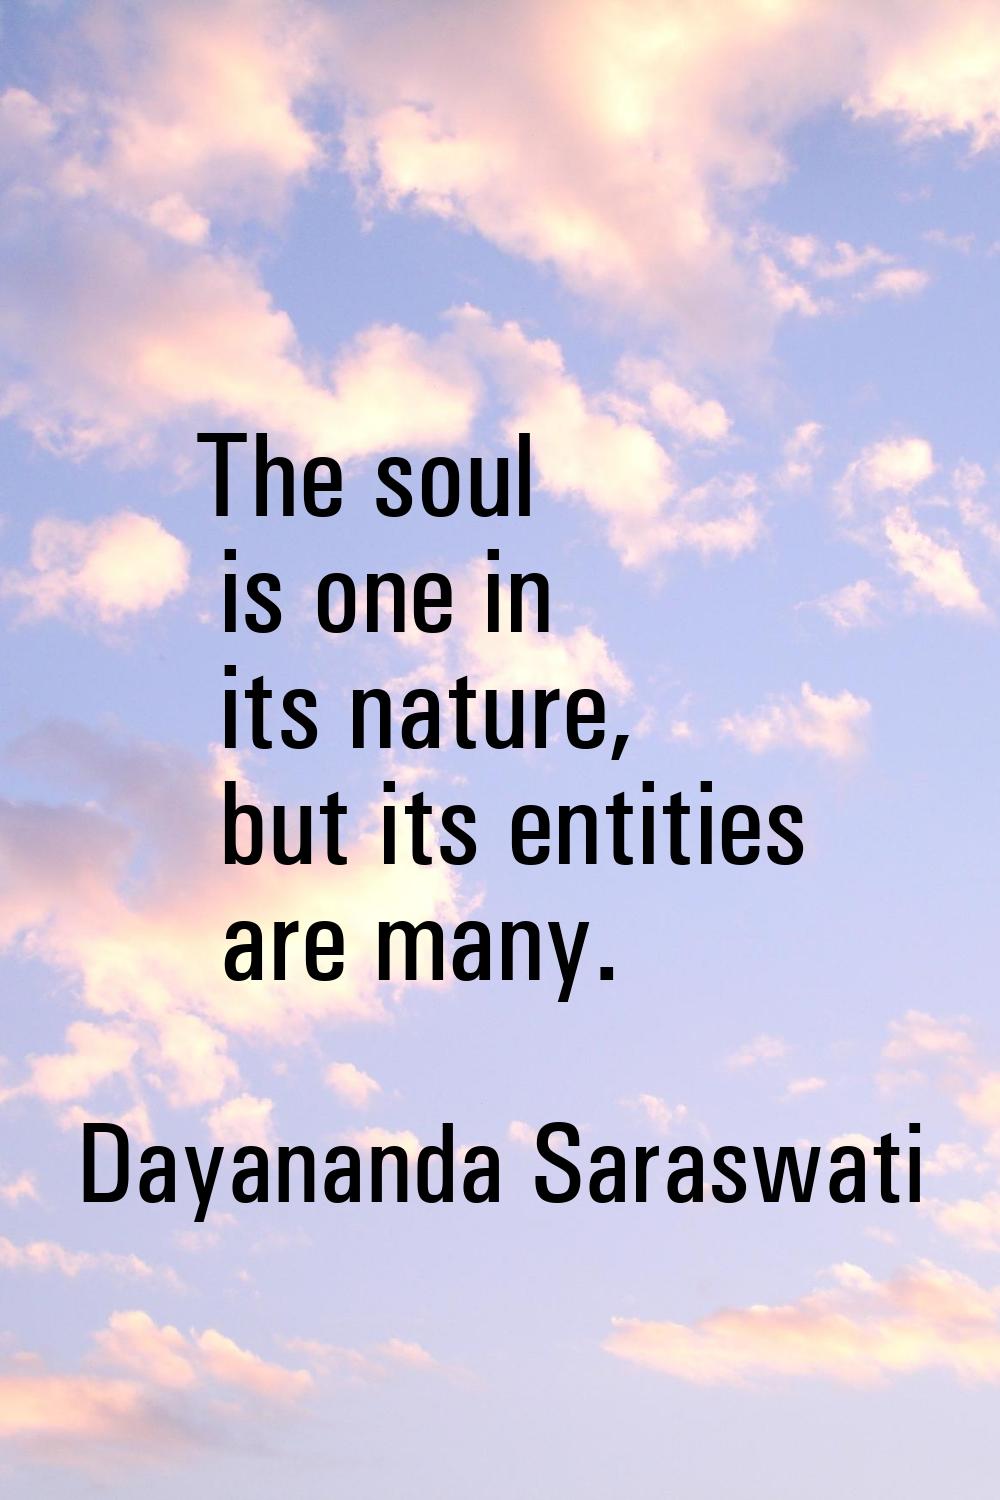 The soul is one in its nature, but its entities are many.